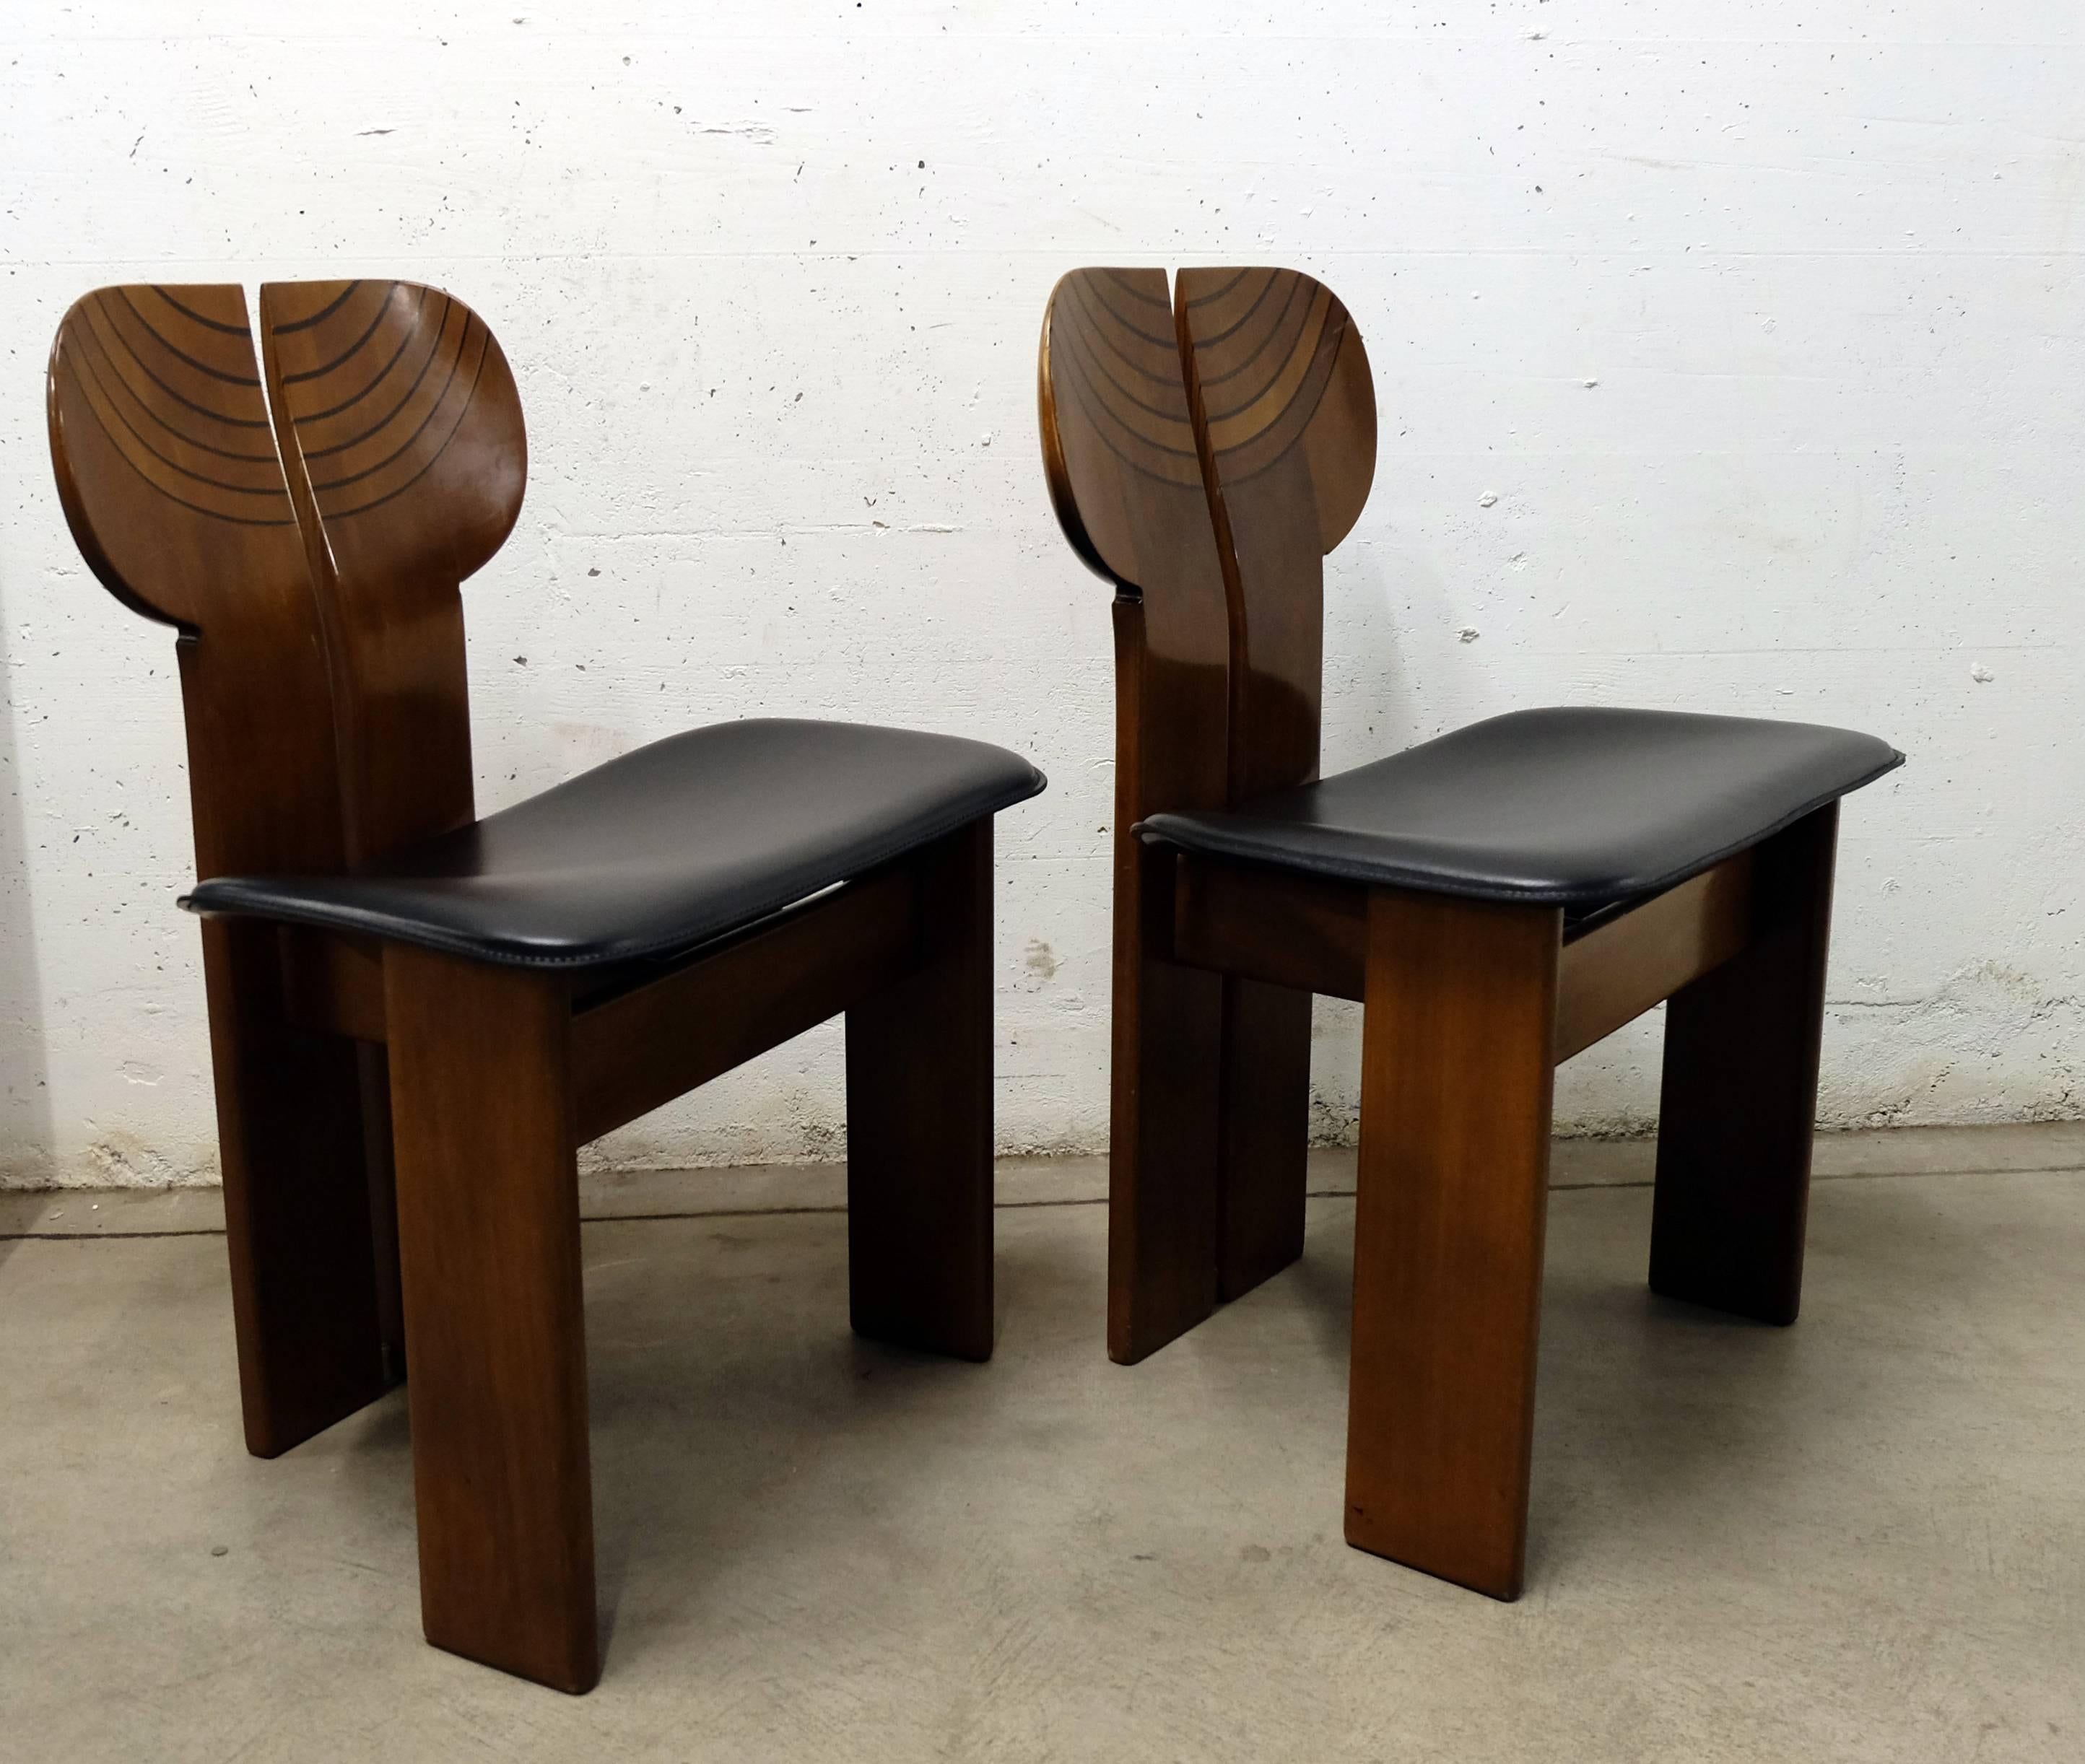 Italian Pair of Africa Chairs by Afra and Tobia Scarpa, Maxalto Artona Series For Sale